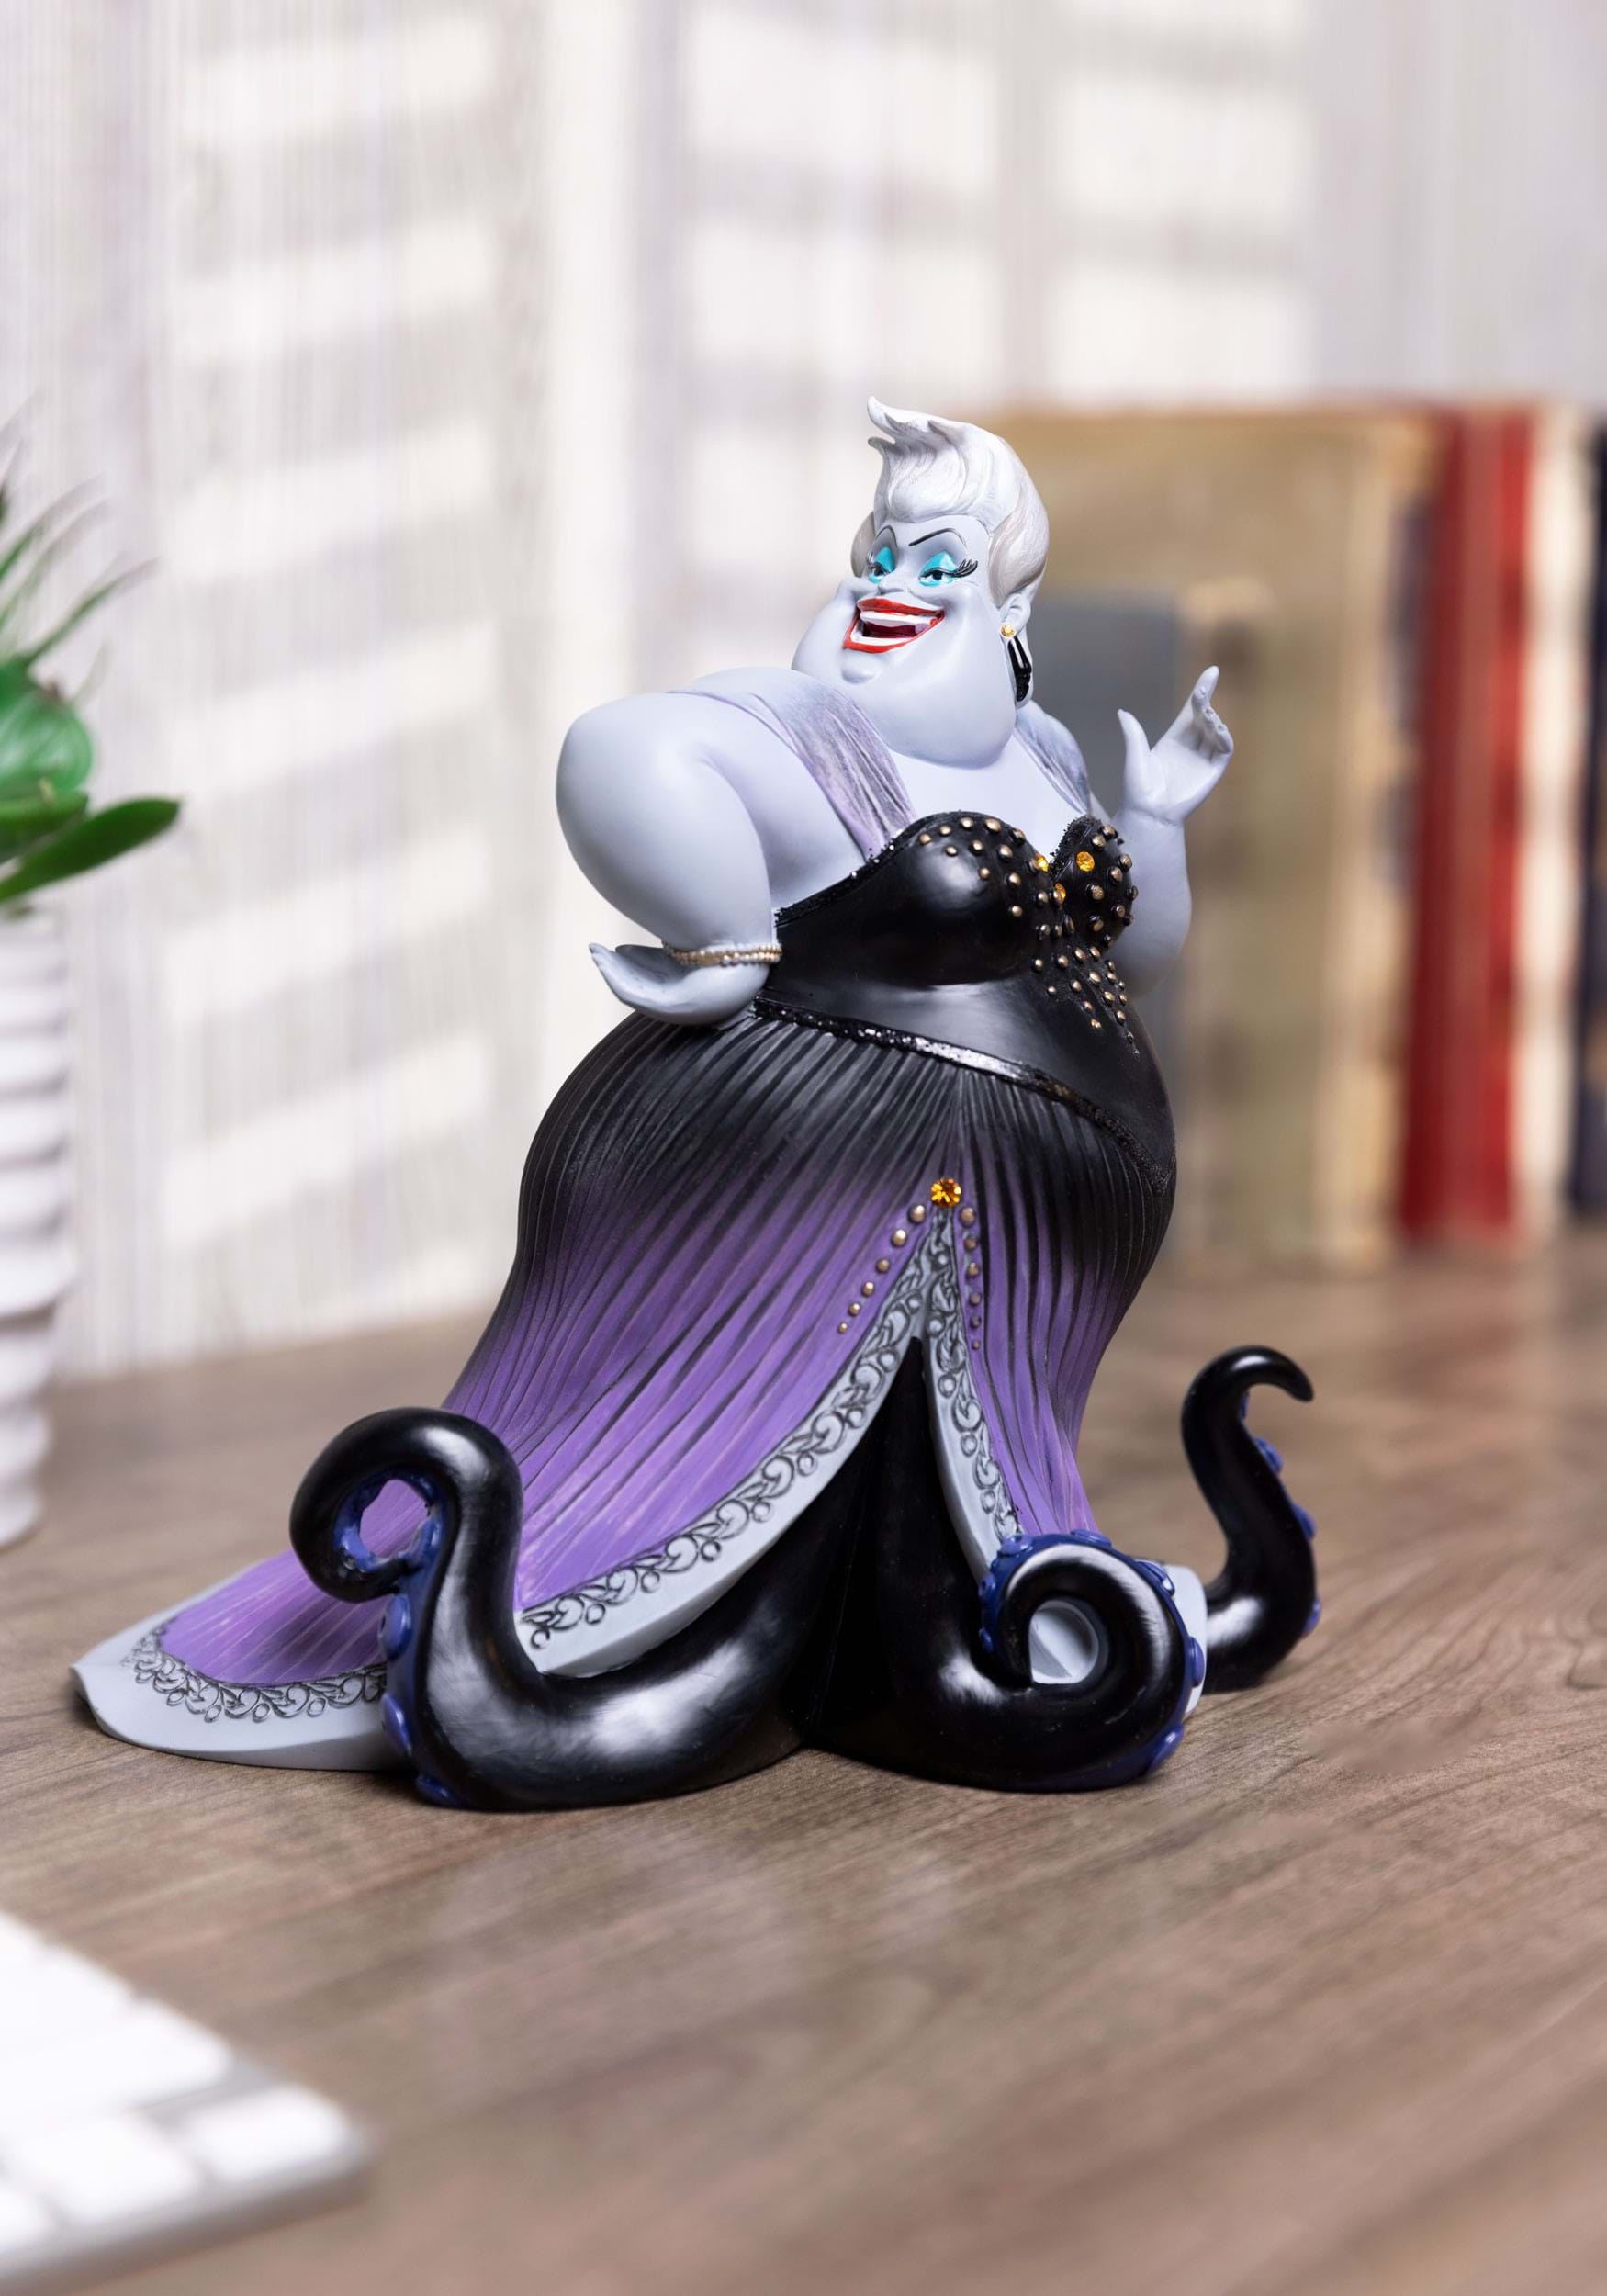 Image of Enesco The Little Mermaid Collectible Ursula Statue